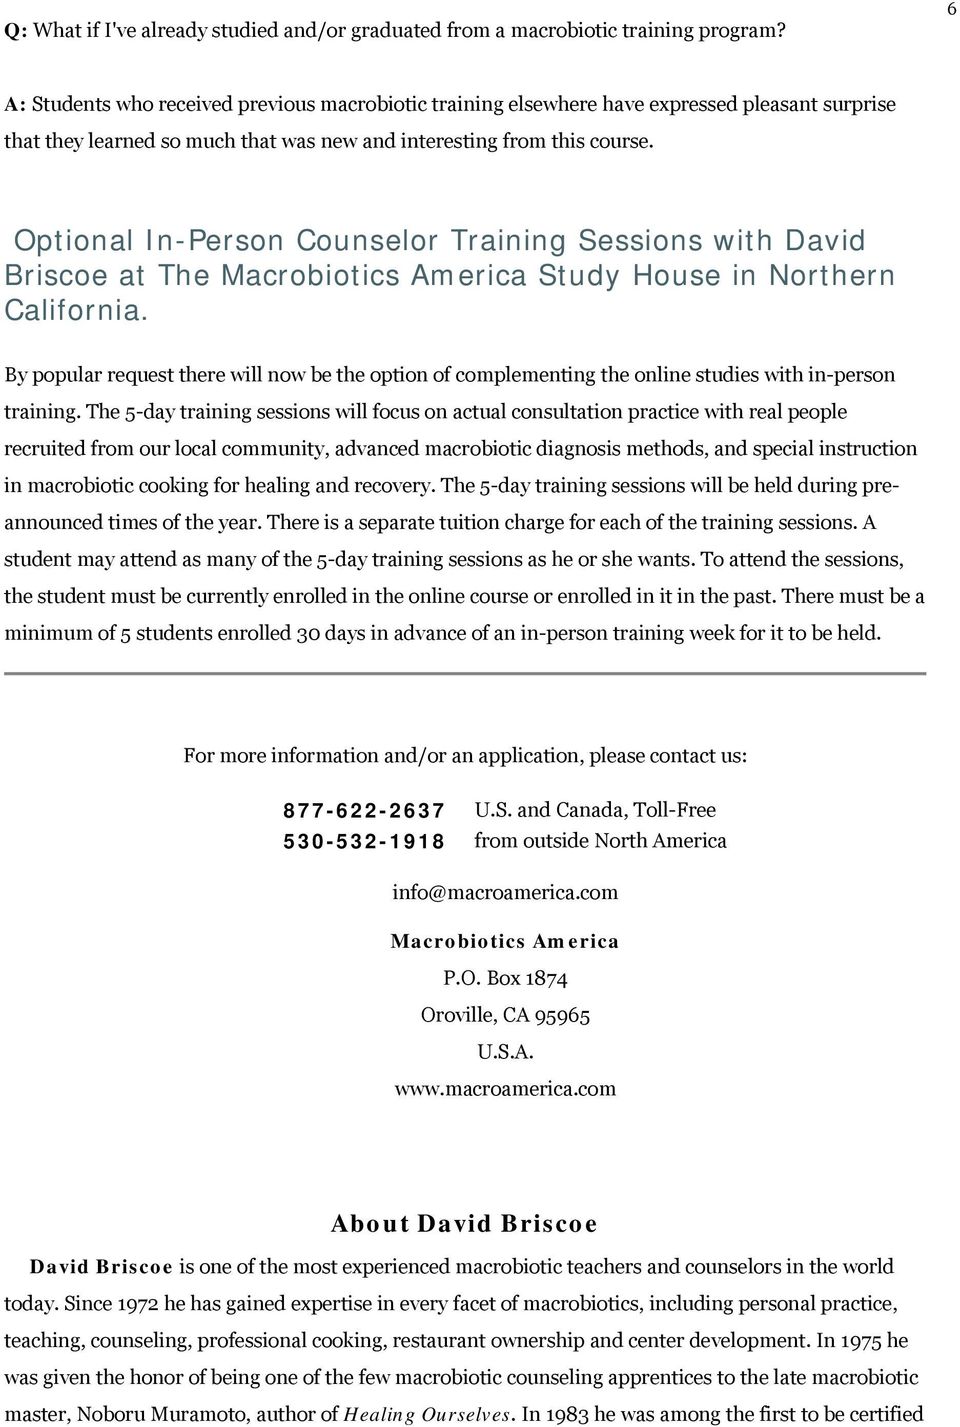 Optional In-Person Counselor Training Sessions with David Briscoe at The Macrobiotics America Study House in Northern California.